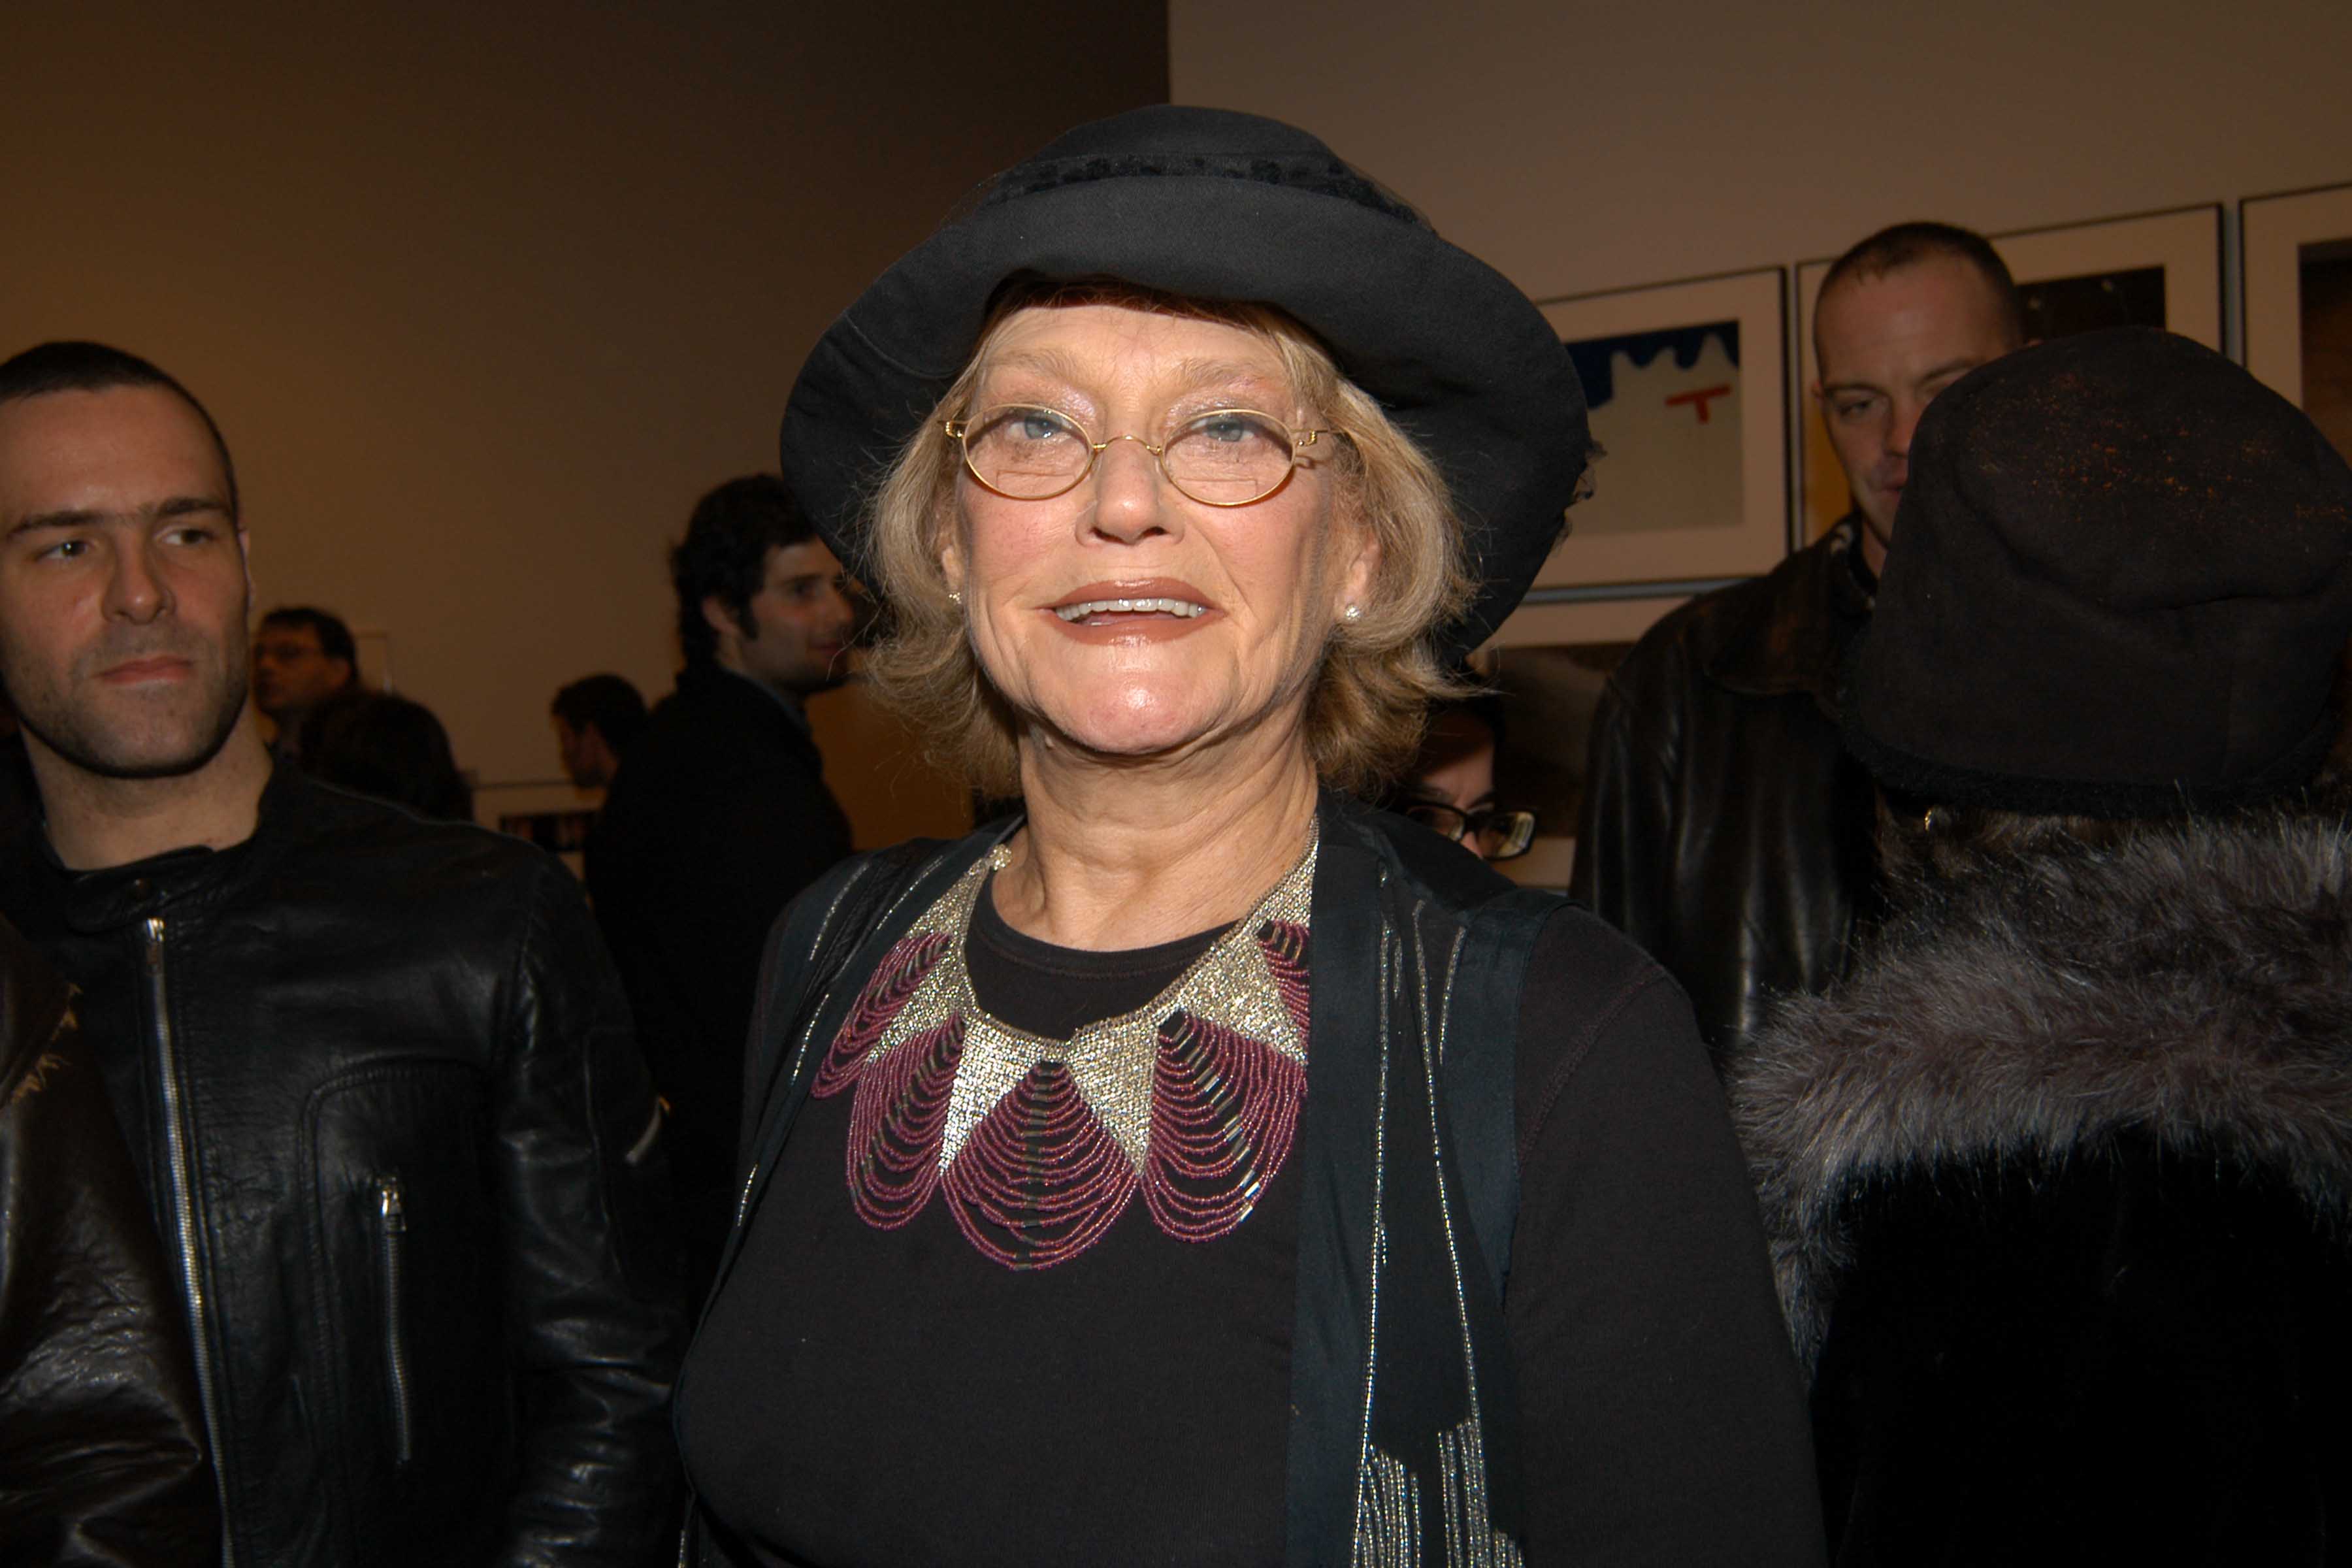 Suzanne Shepherd during the "Change of Life" opening reception on February 7, 2004 in New York City | Source: Getty Images